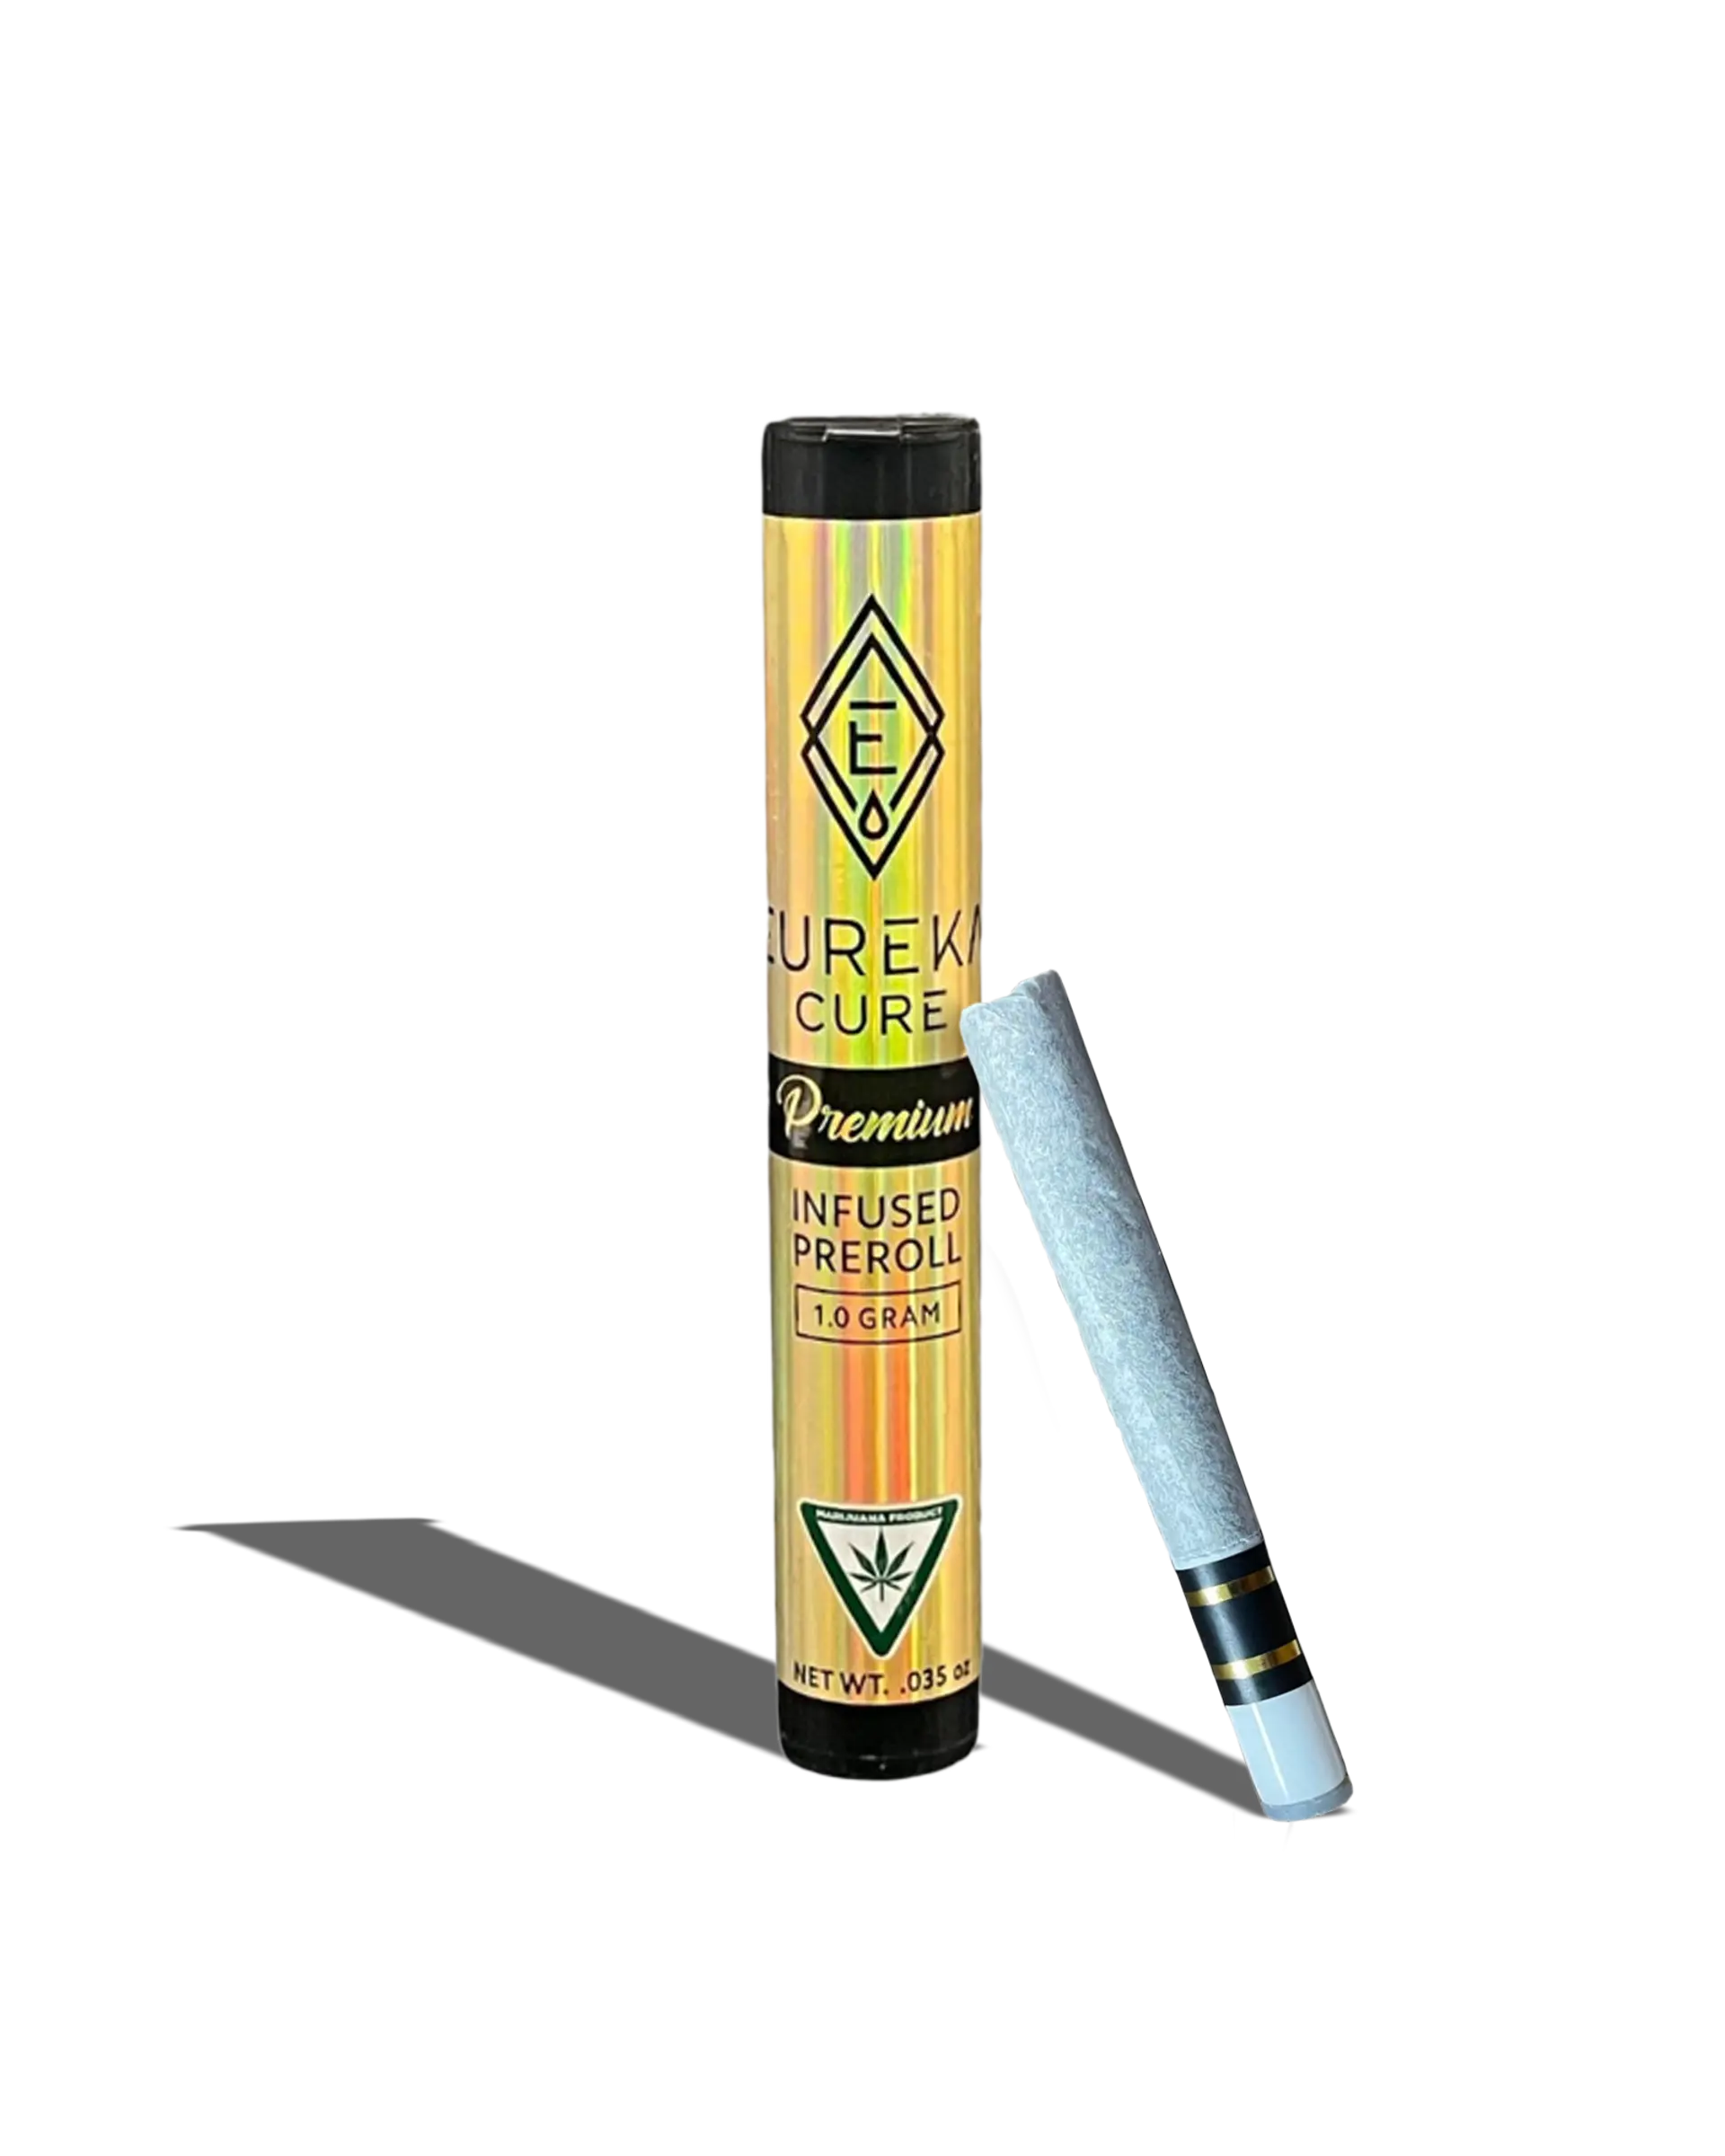 High Society X Eggroll Live Resin Infused Preroll 1g, 1 of 1